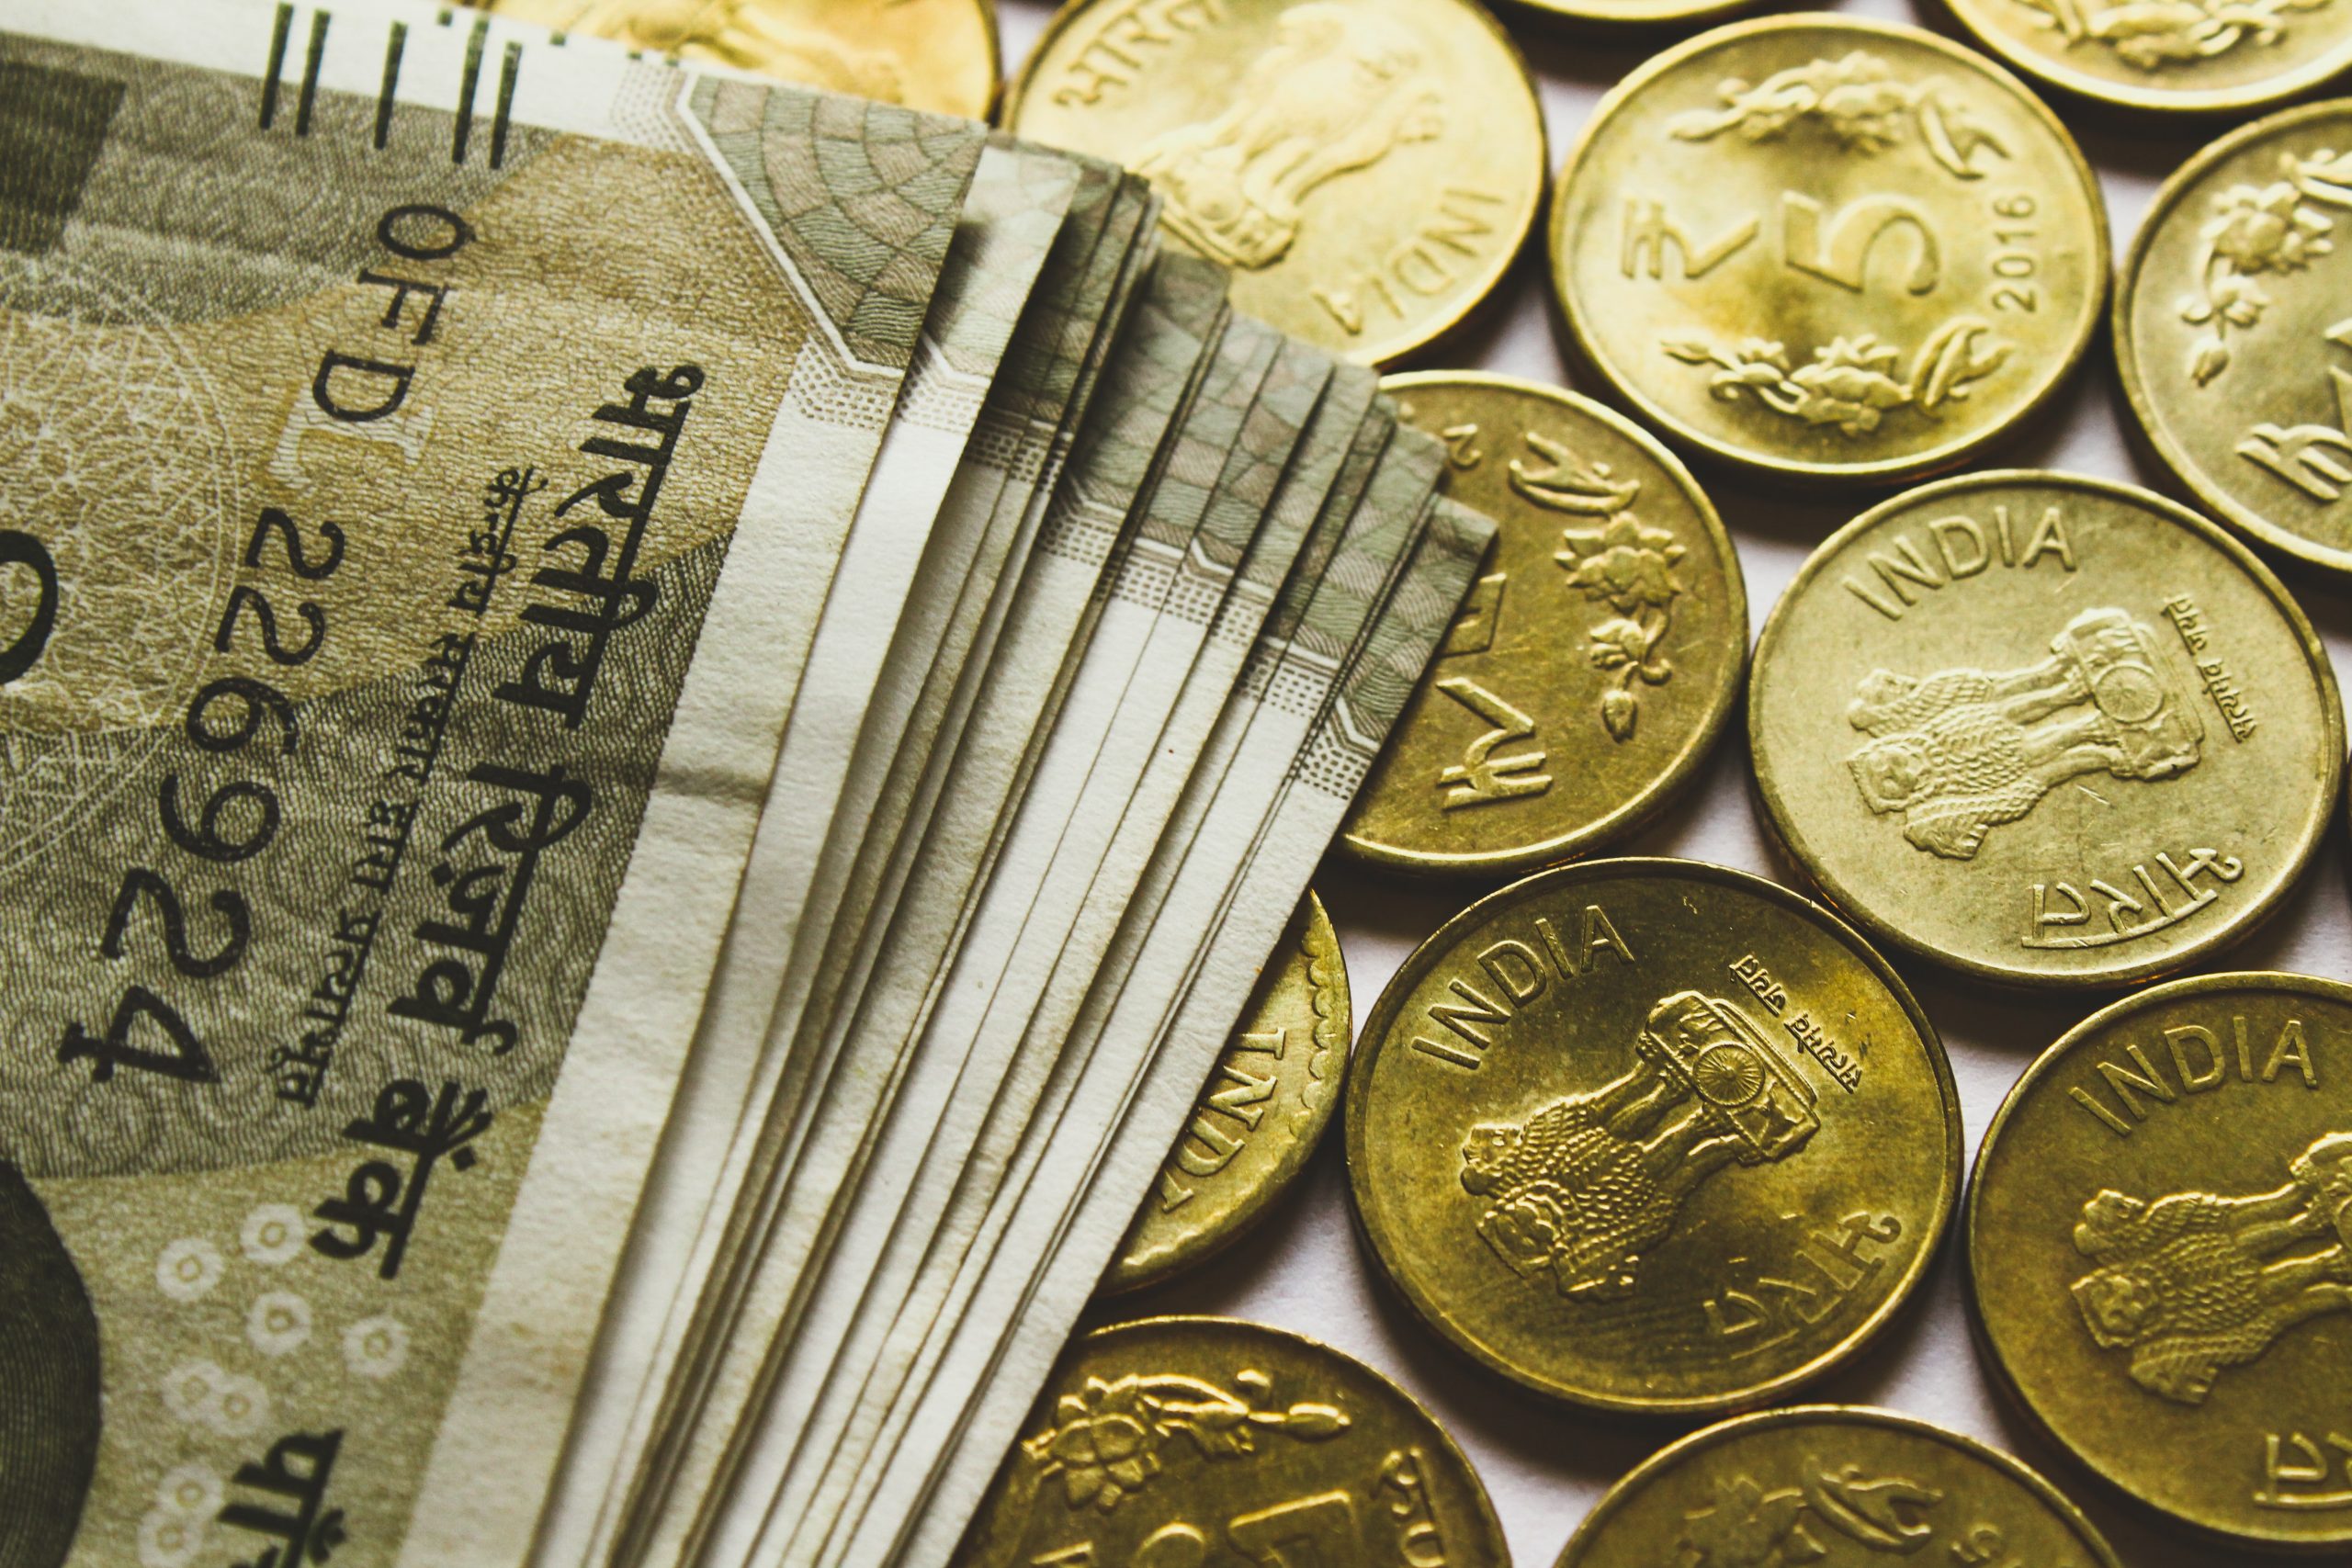 round gold-colored rupee coins and banknotes